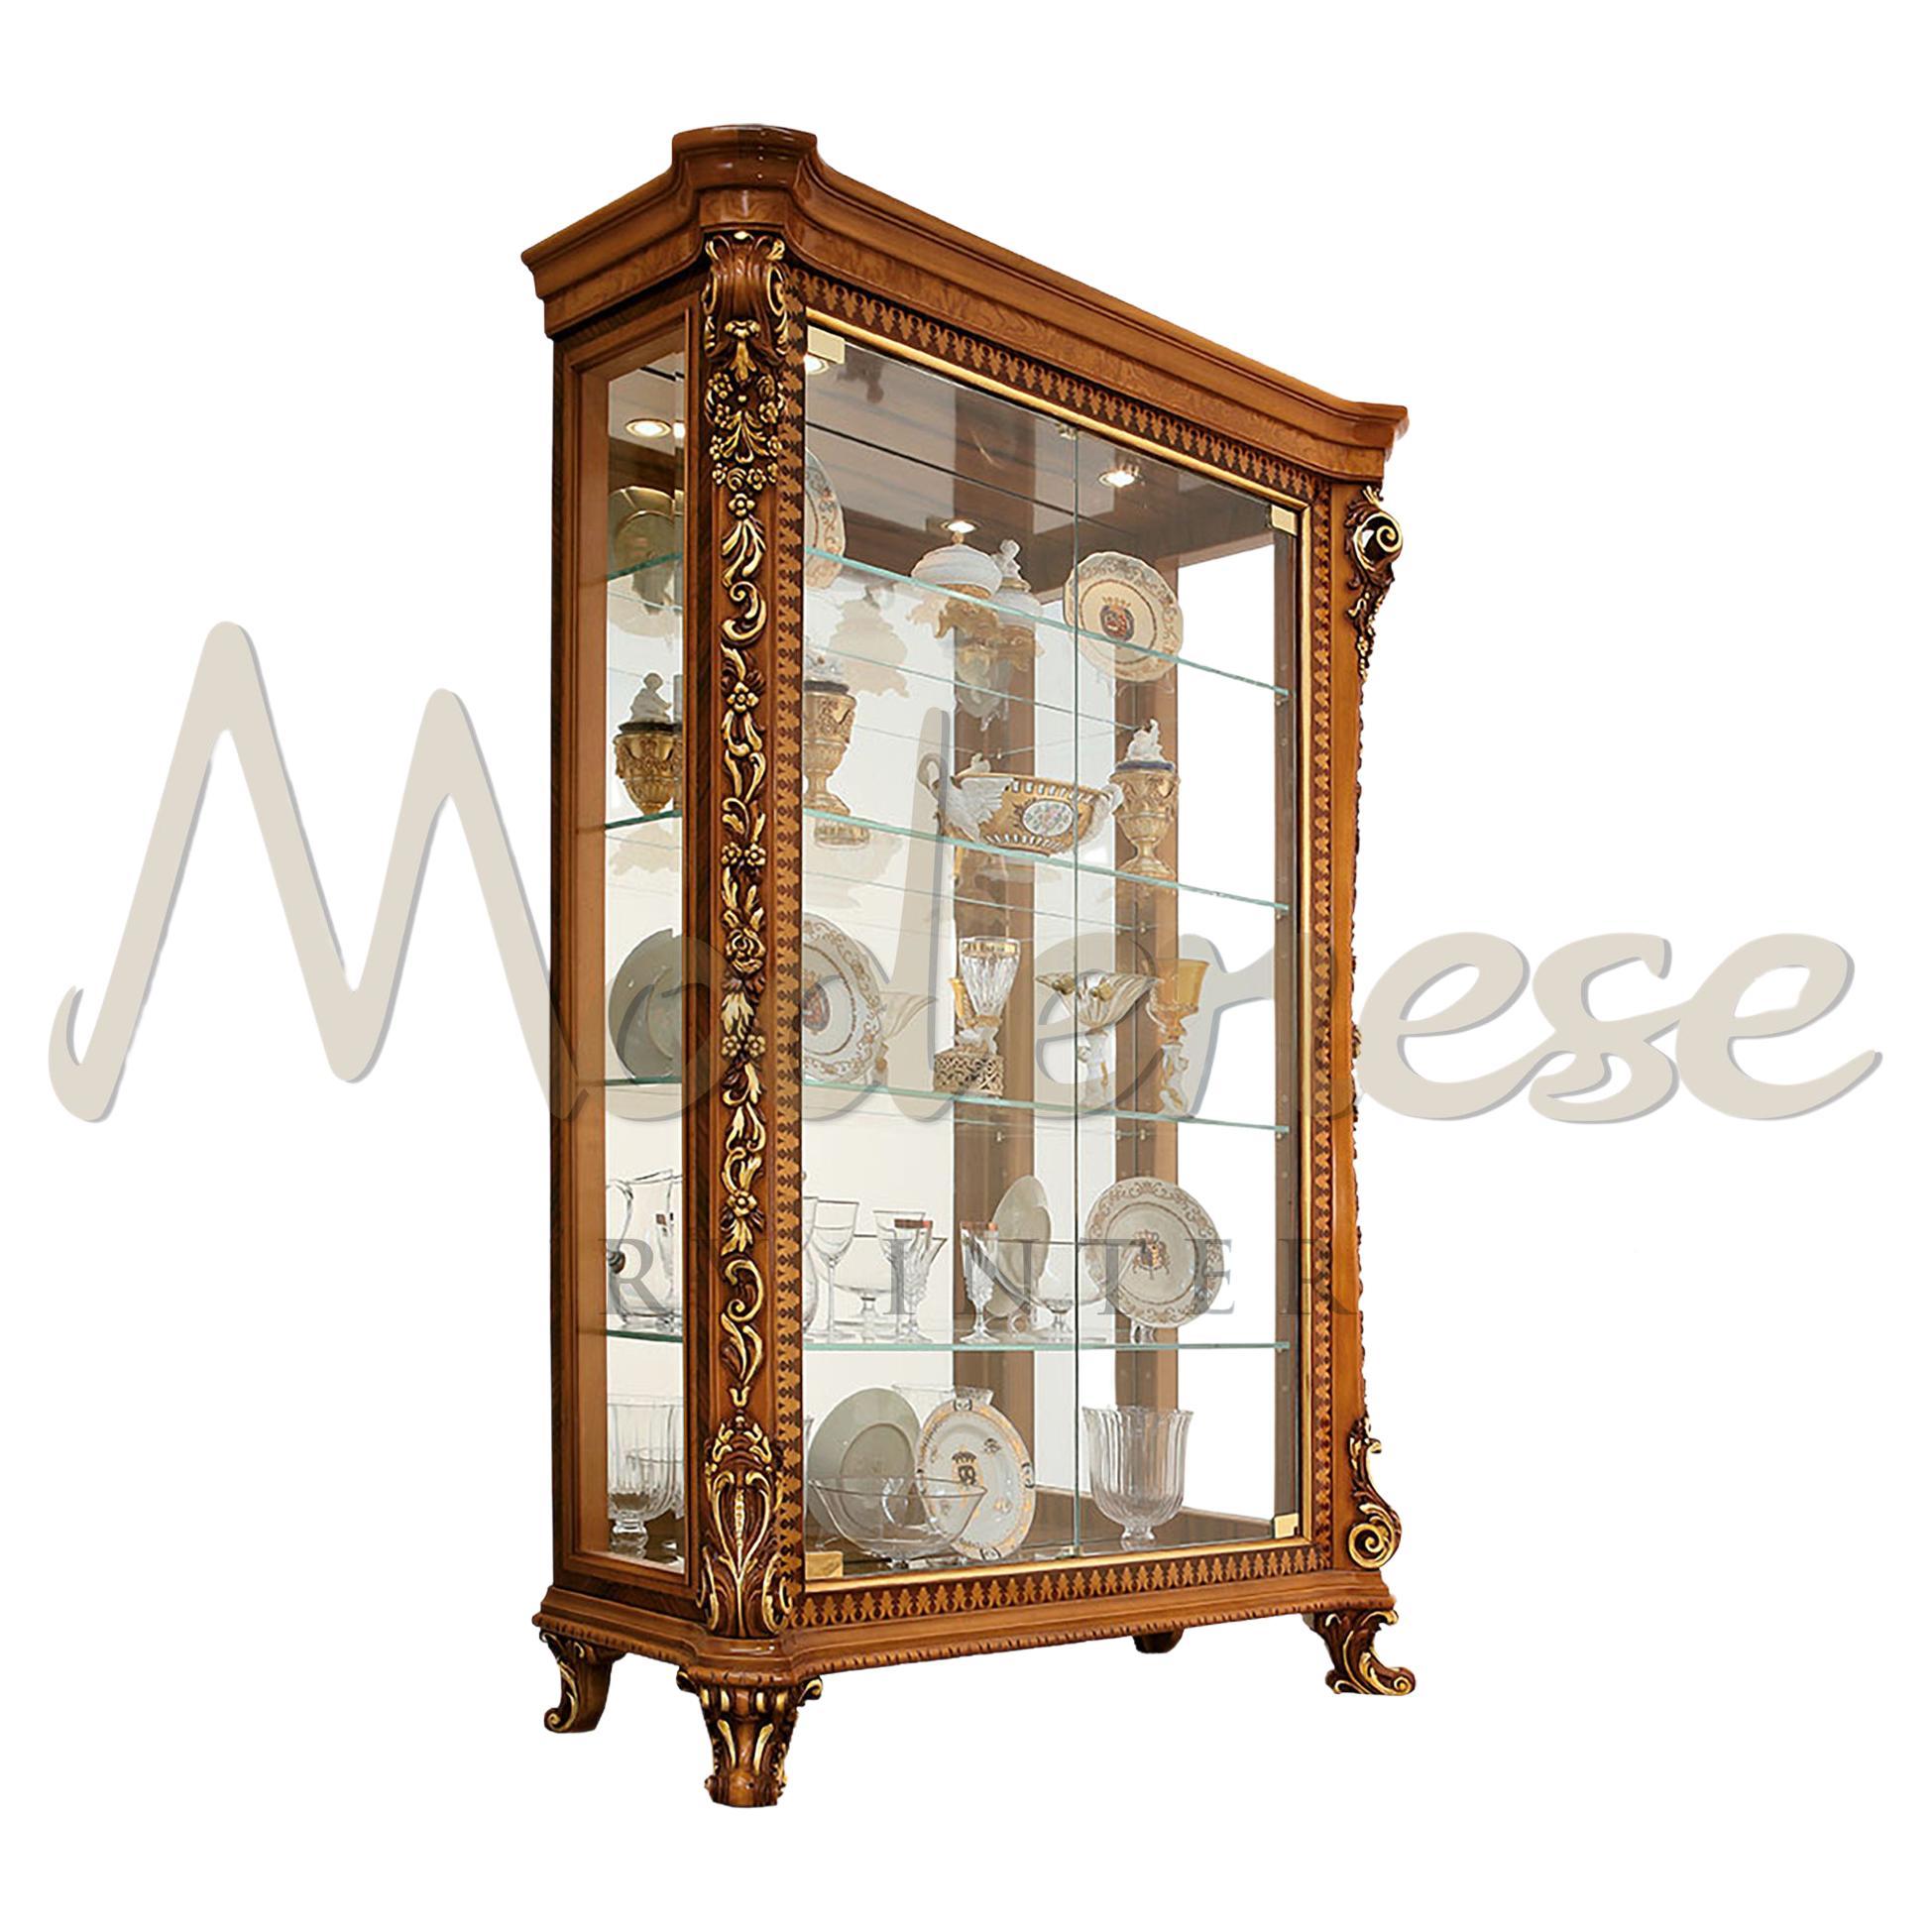 Modenese Luxury Interiors is proud to promote his production and design services by showing you this wondeful baroque vitrine for dining rooms. 
Its wide surfaces are ideal for big house areas and dining atmoshperes, where the light for chandeliers